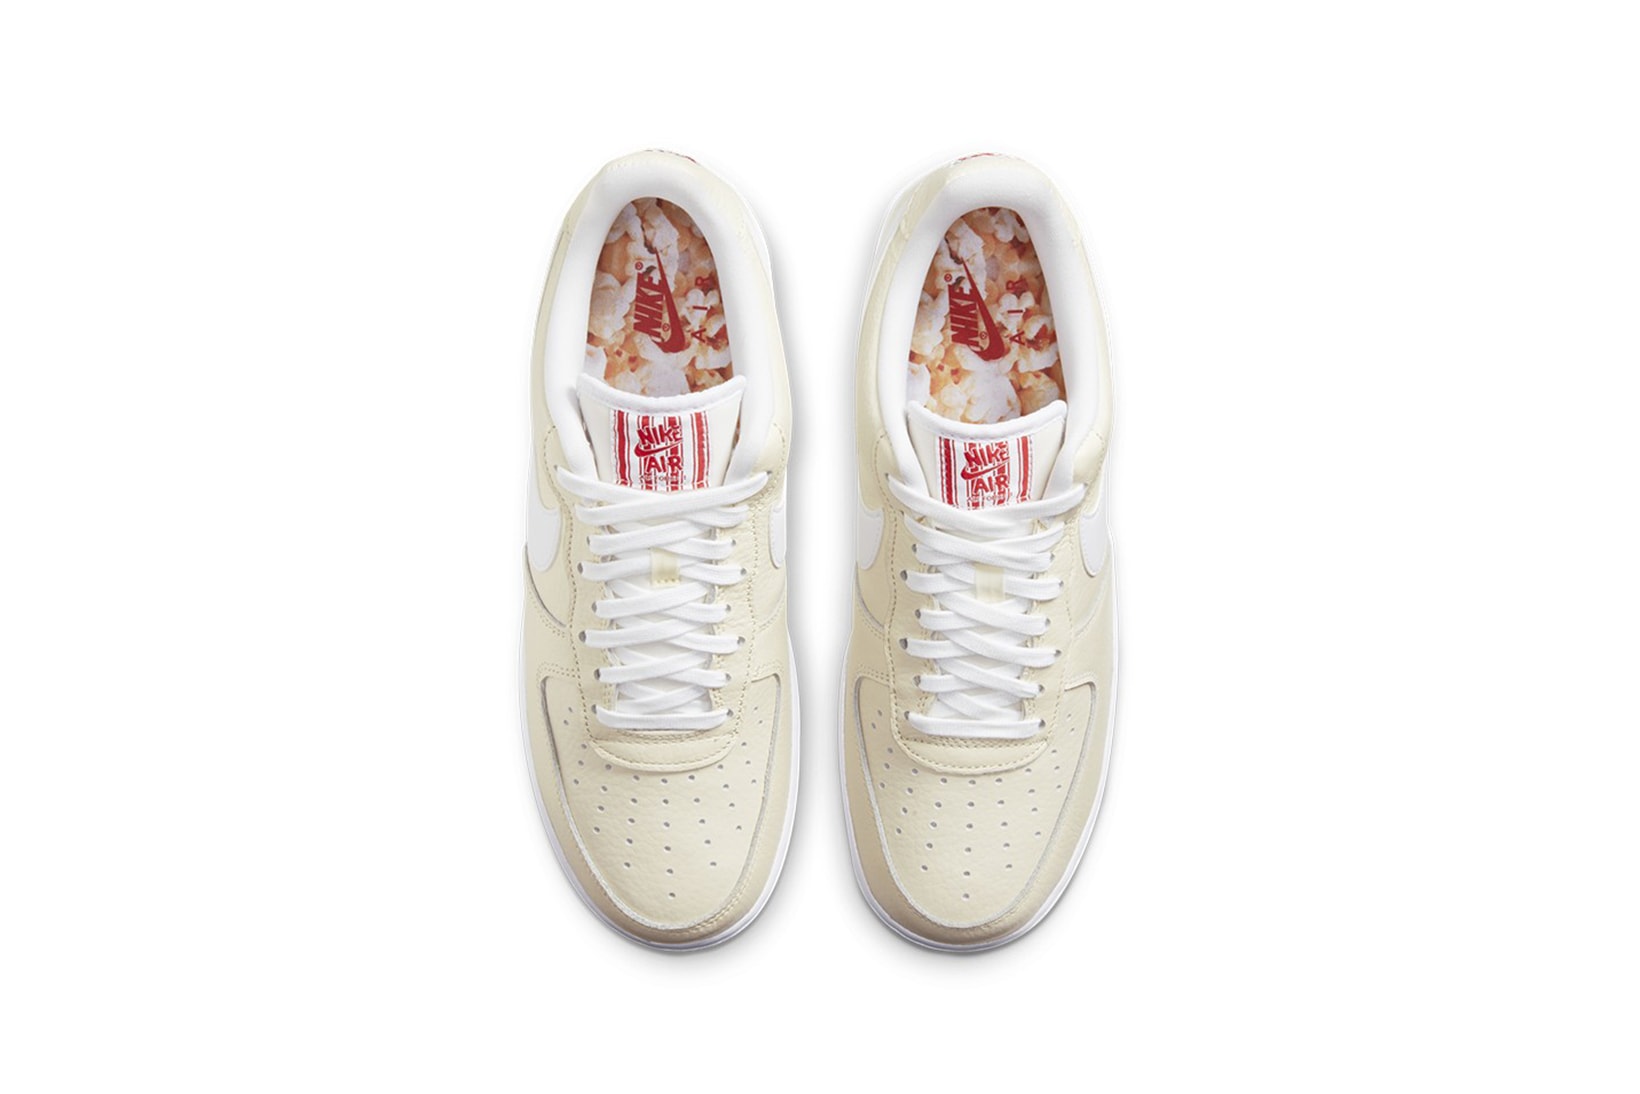 nike air force 1 af1 low popcorn sneakers cream white red colorway footwear shoes sneakerhead aerial view birds eye insole laces